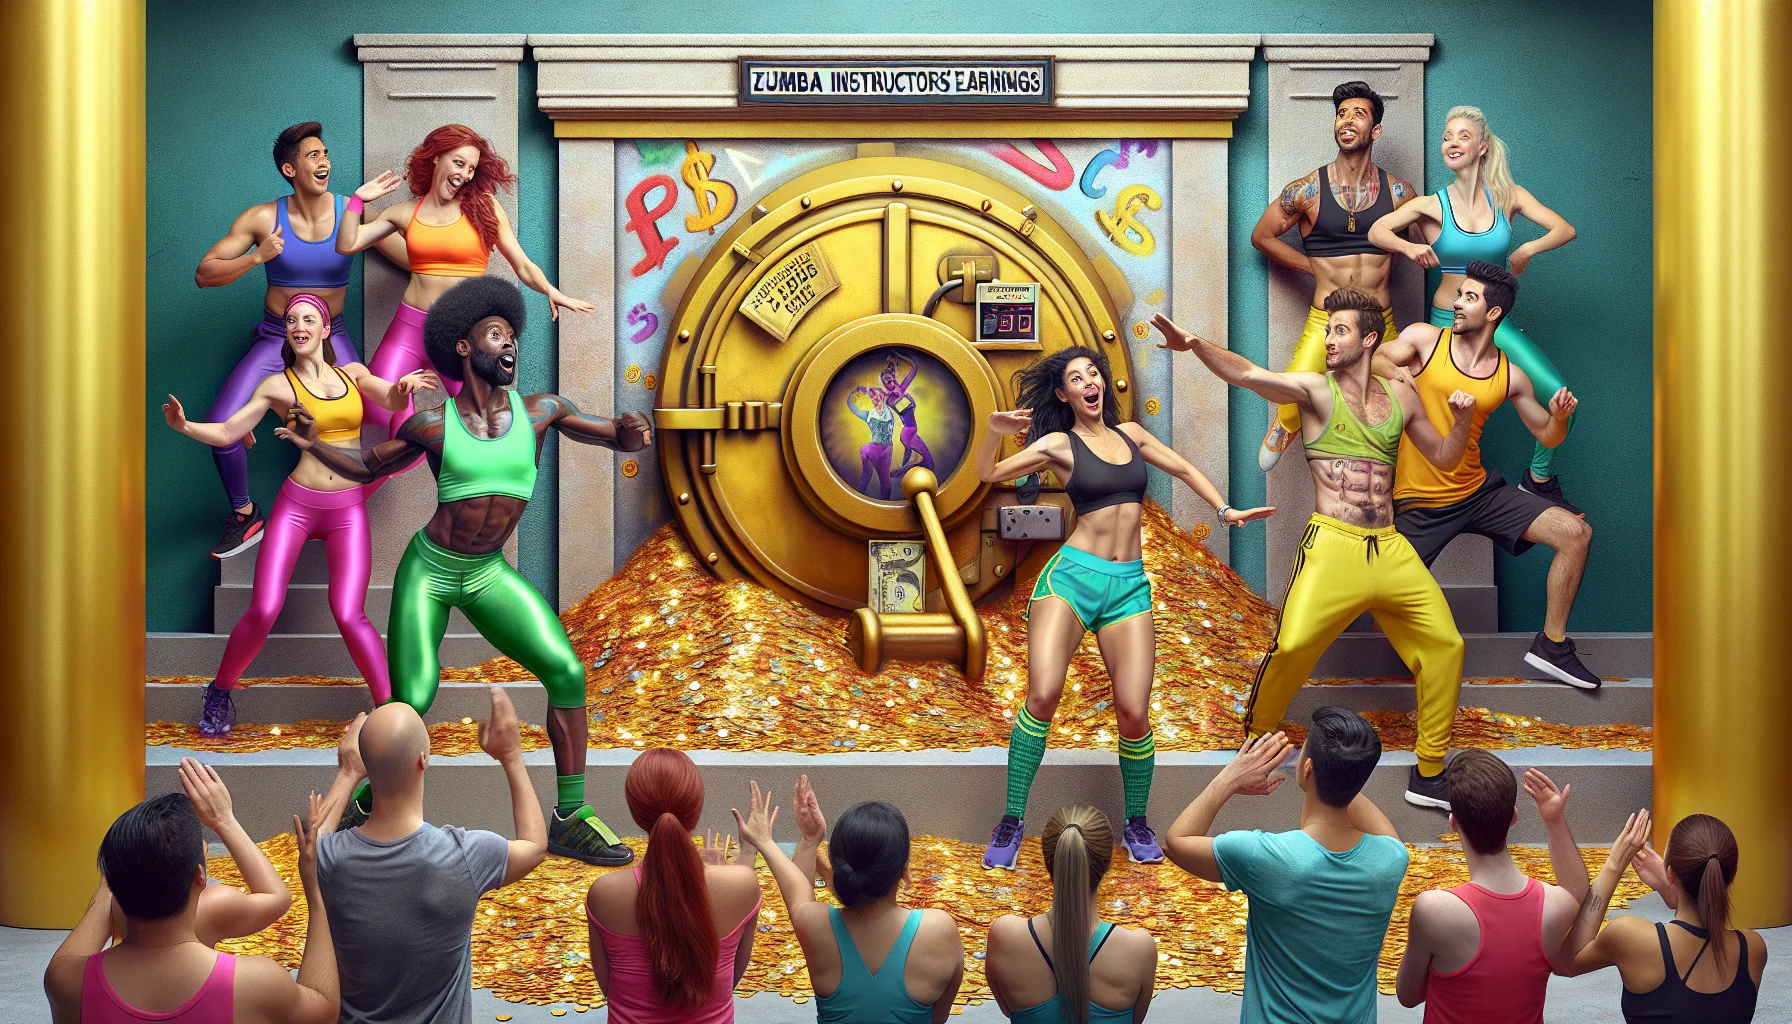 Generate a realistic and humorous image of a diverse group of zumba instructors at a dance studio. The instructors are of various descents, including Caucasian, Hispanic, Black, Middle-Eastern, and South Asian. They wear vibrant sportswear and are caught in dynamic, energetic dance poses. One wall of the studio is humorously painted like an oversized, glimmering treasure vault, with signage that playfully reads 'Zumba Instructors' Earnings'. Behind them, a group of people eagerly waiting to sign up, enticed by the promise of fitness and fun.